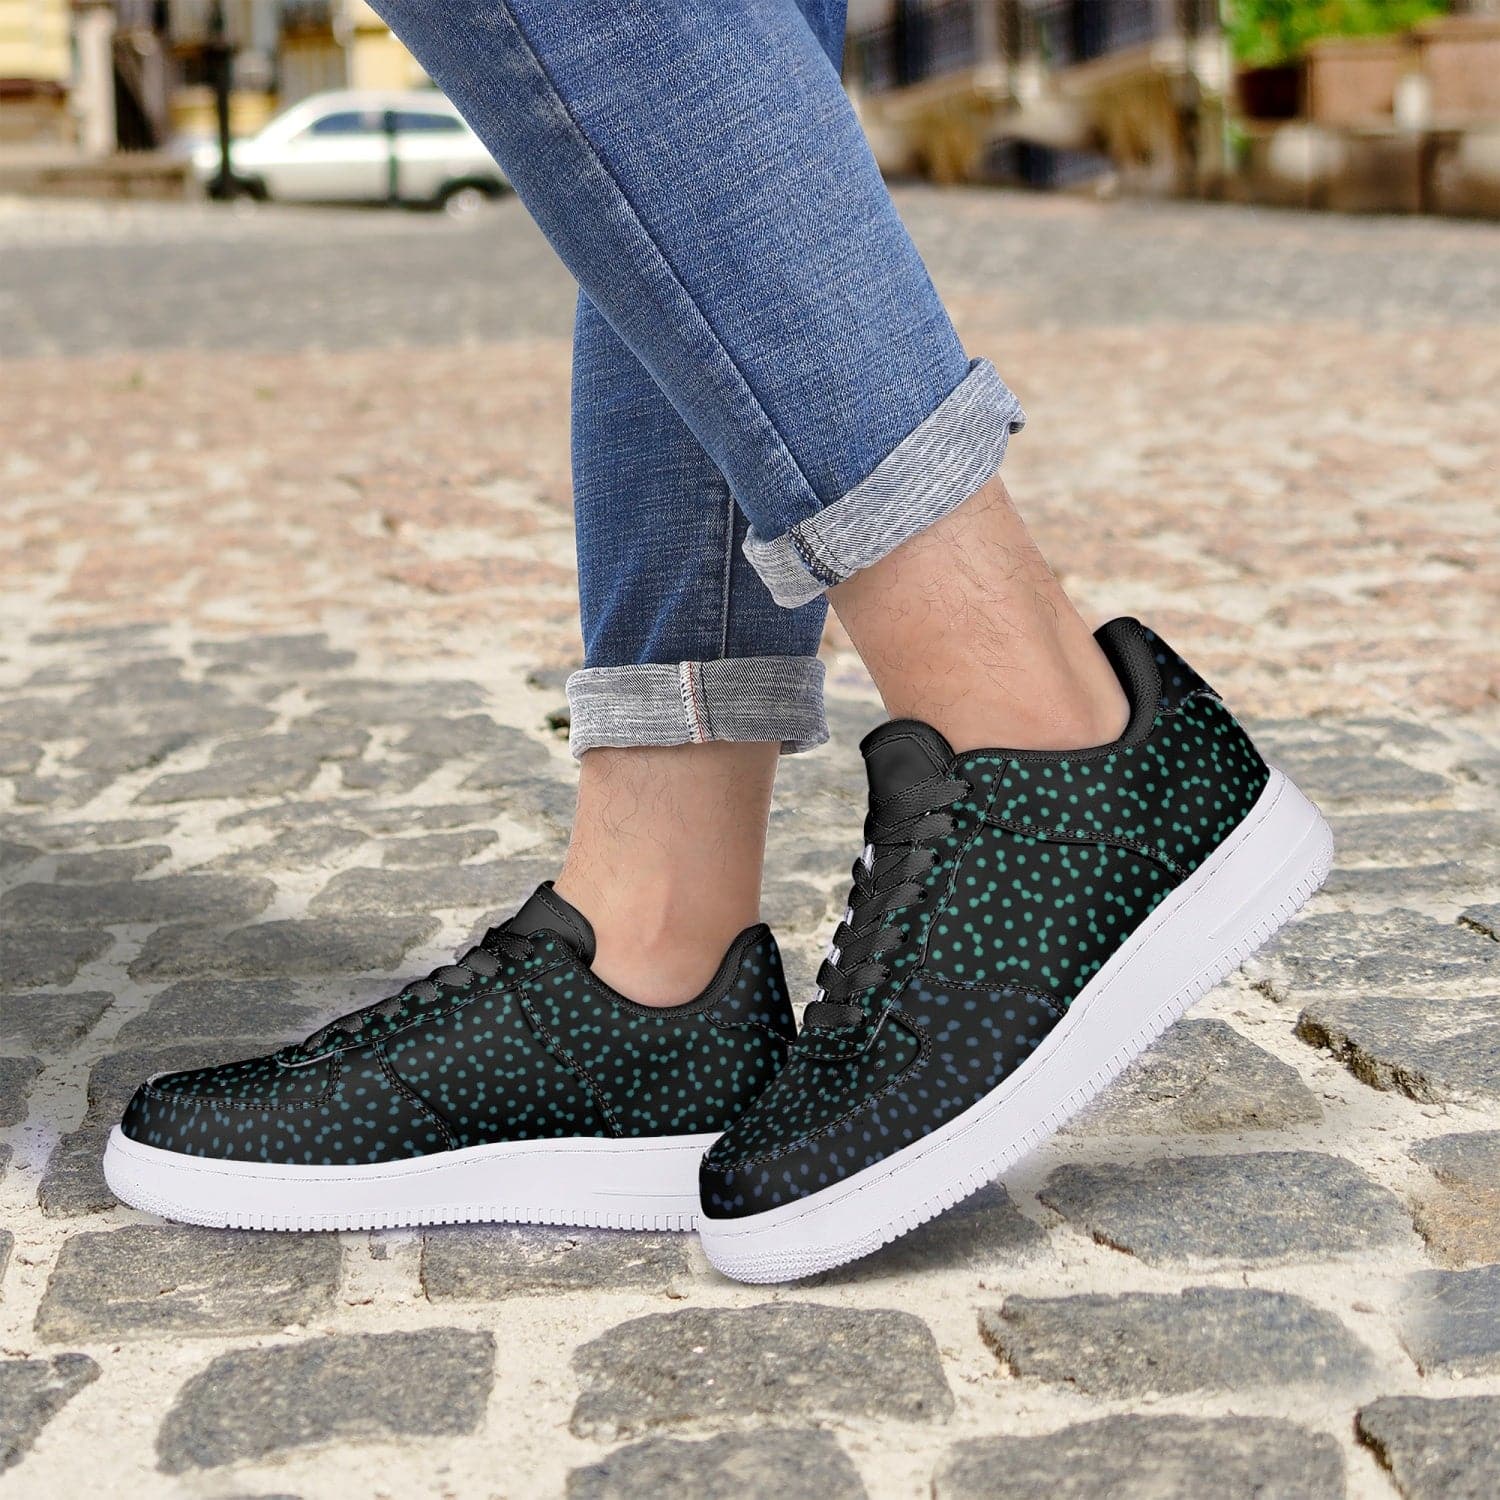 Blue and green night, Stylish 2022 Black Low-Top Leather Sports Sneakers for women, by Sensus Studio Design